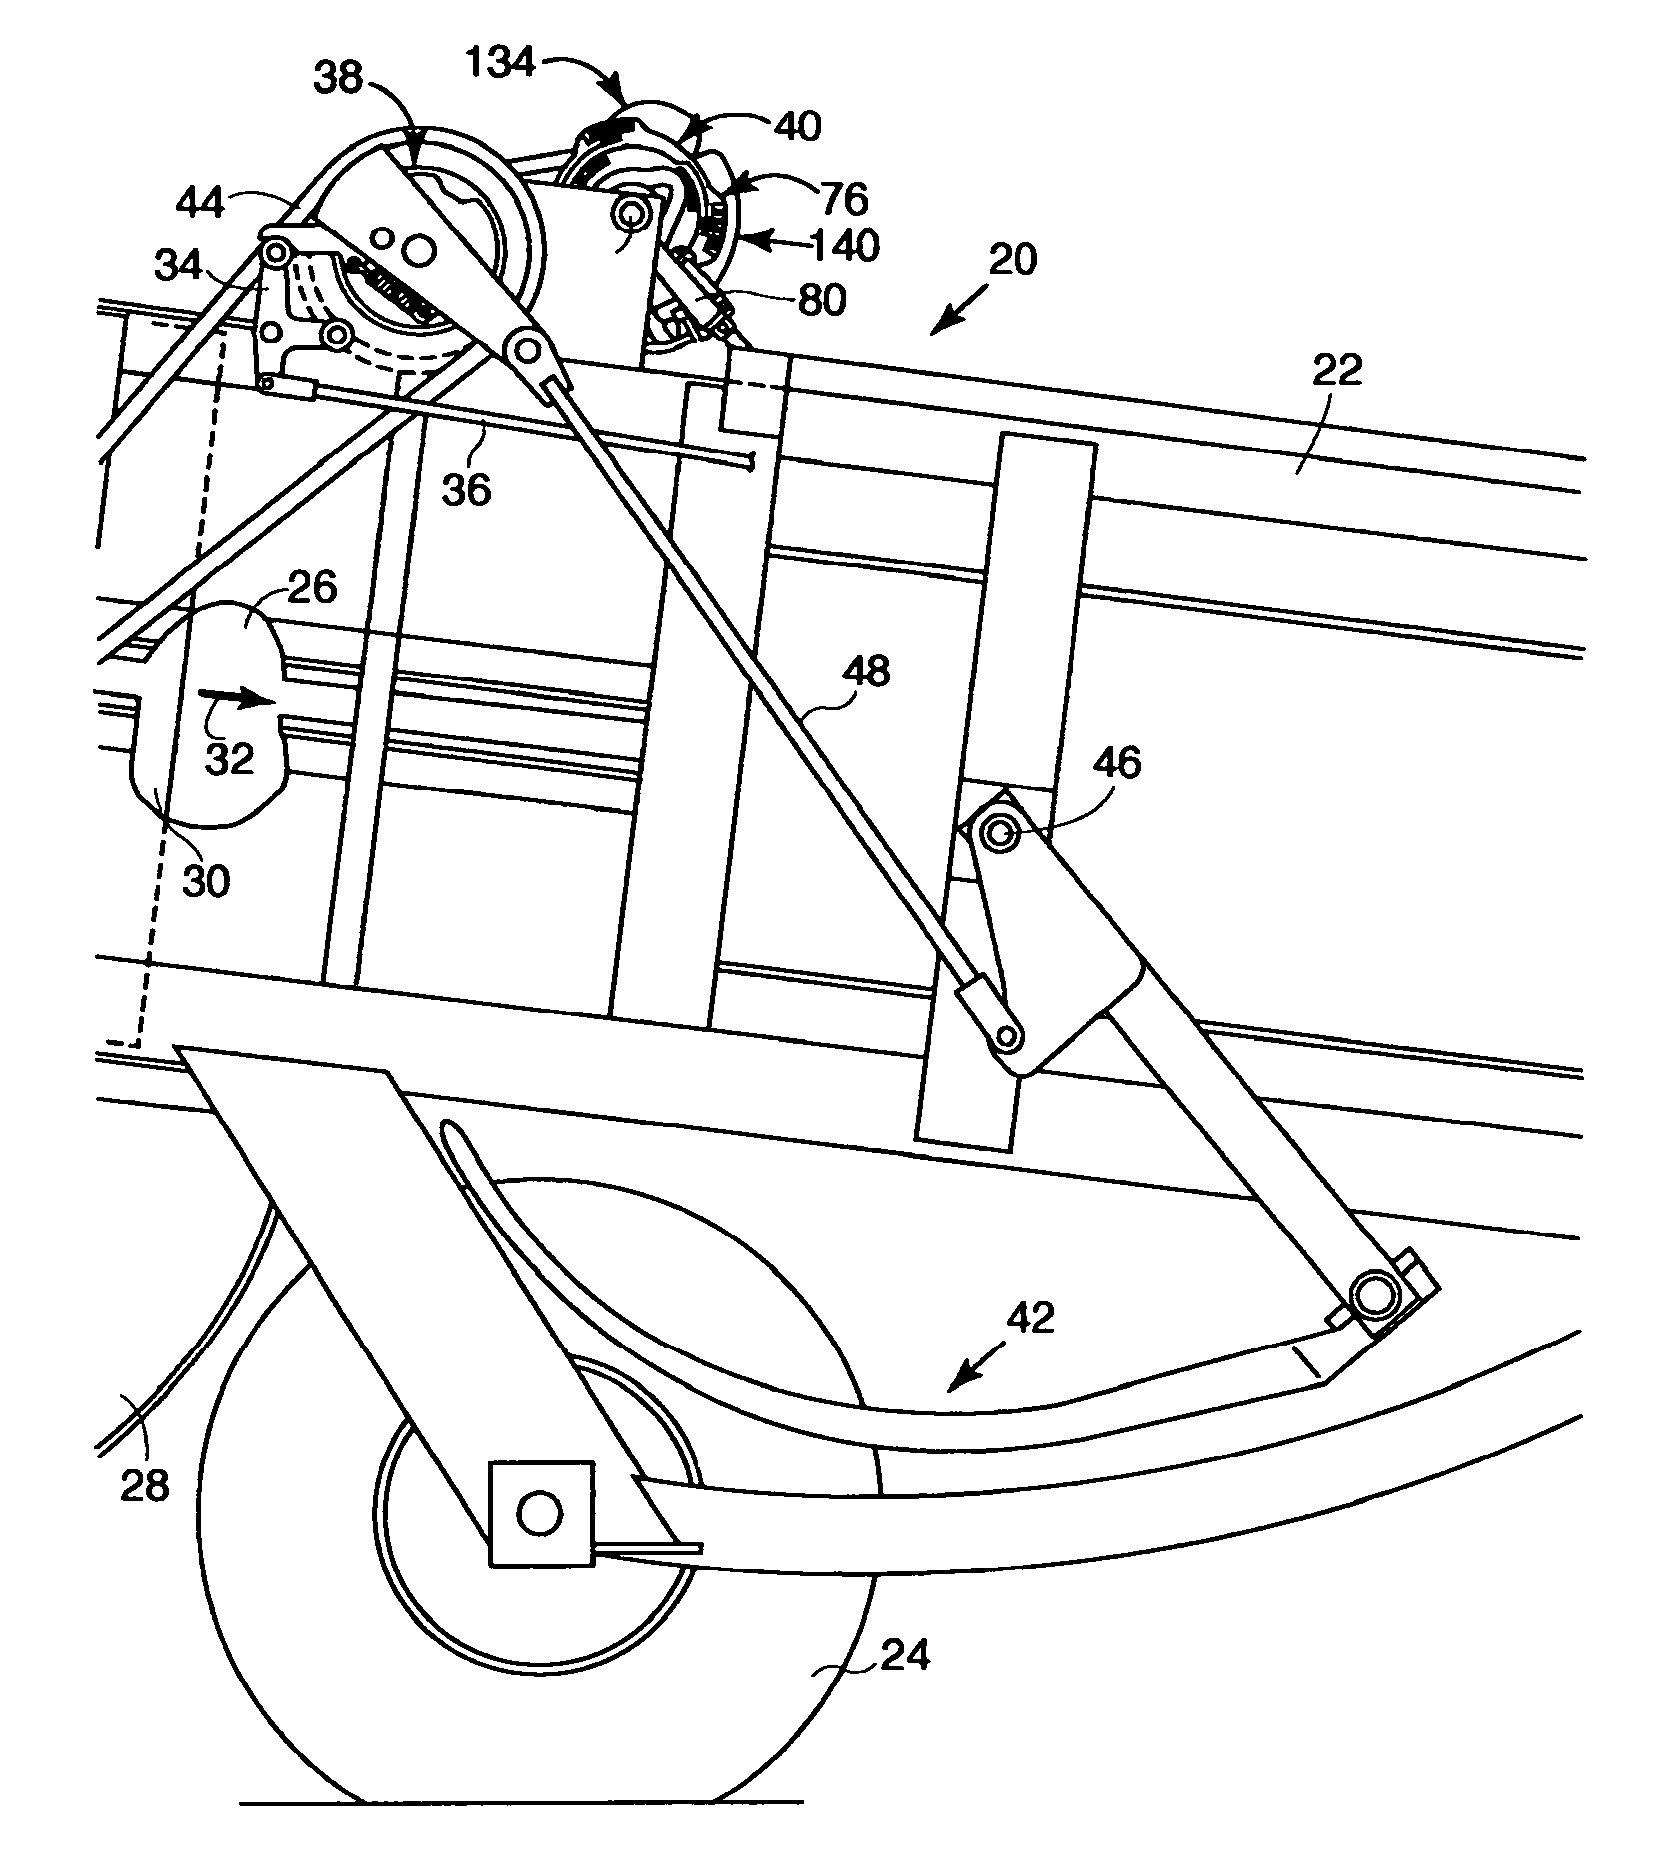 Double knotting system for an agricultural baler